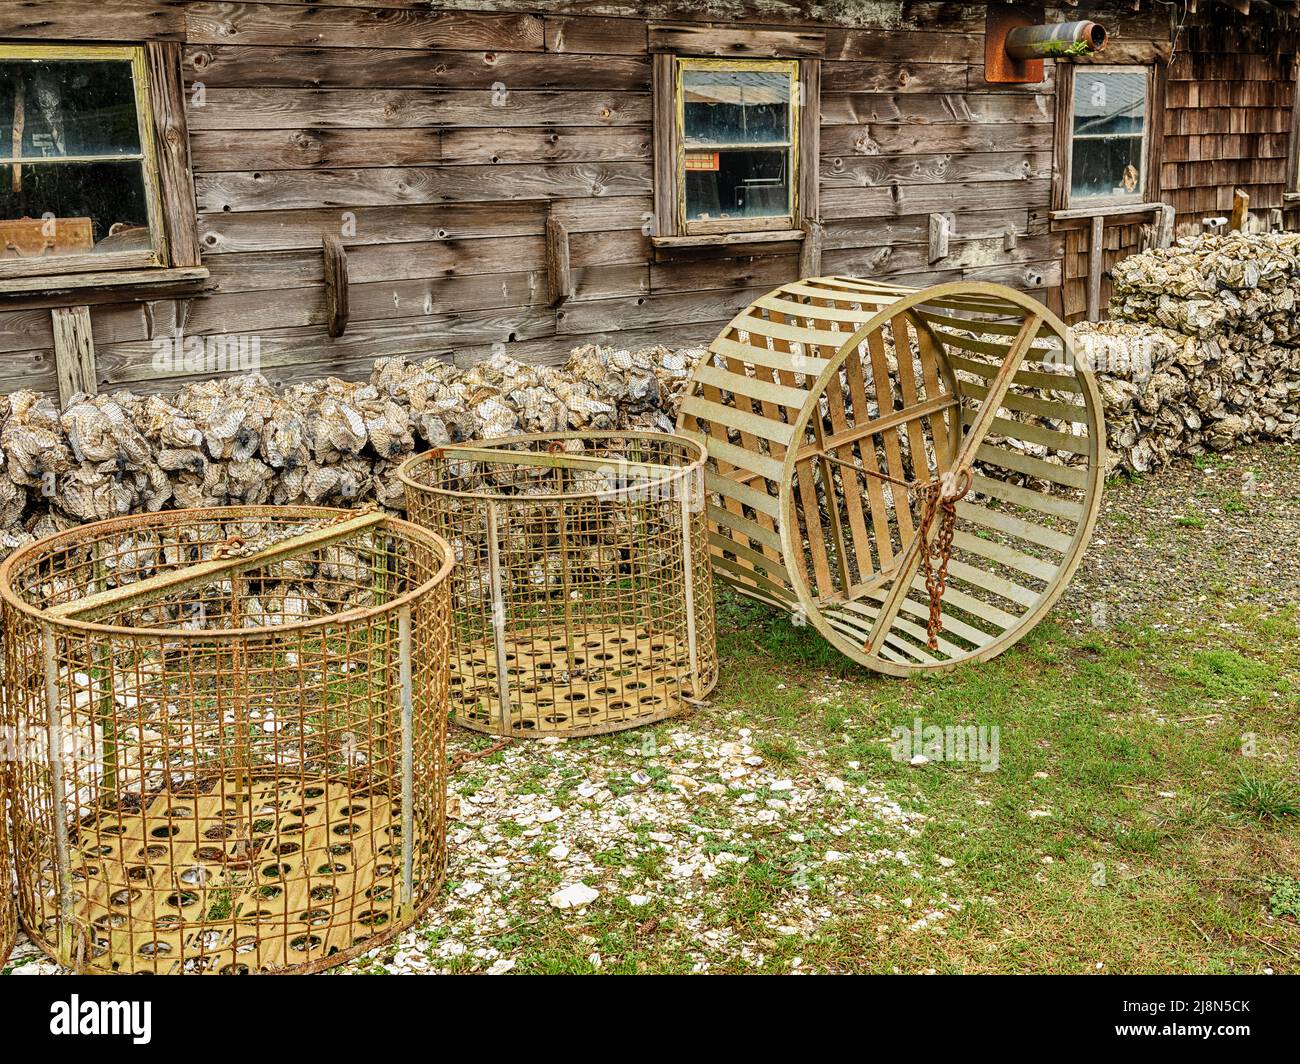 Wooden baskets used for oyster harvesting are stored behind a shed at an oyster farm near Willapa Bay in Washington. Stock Photo